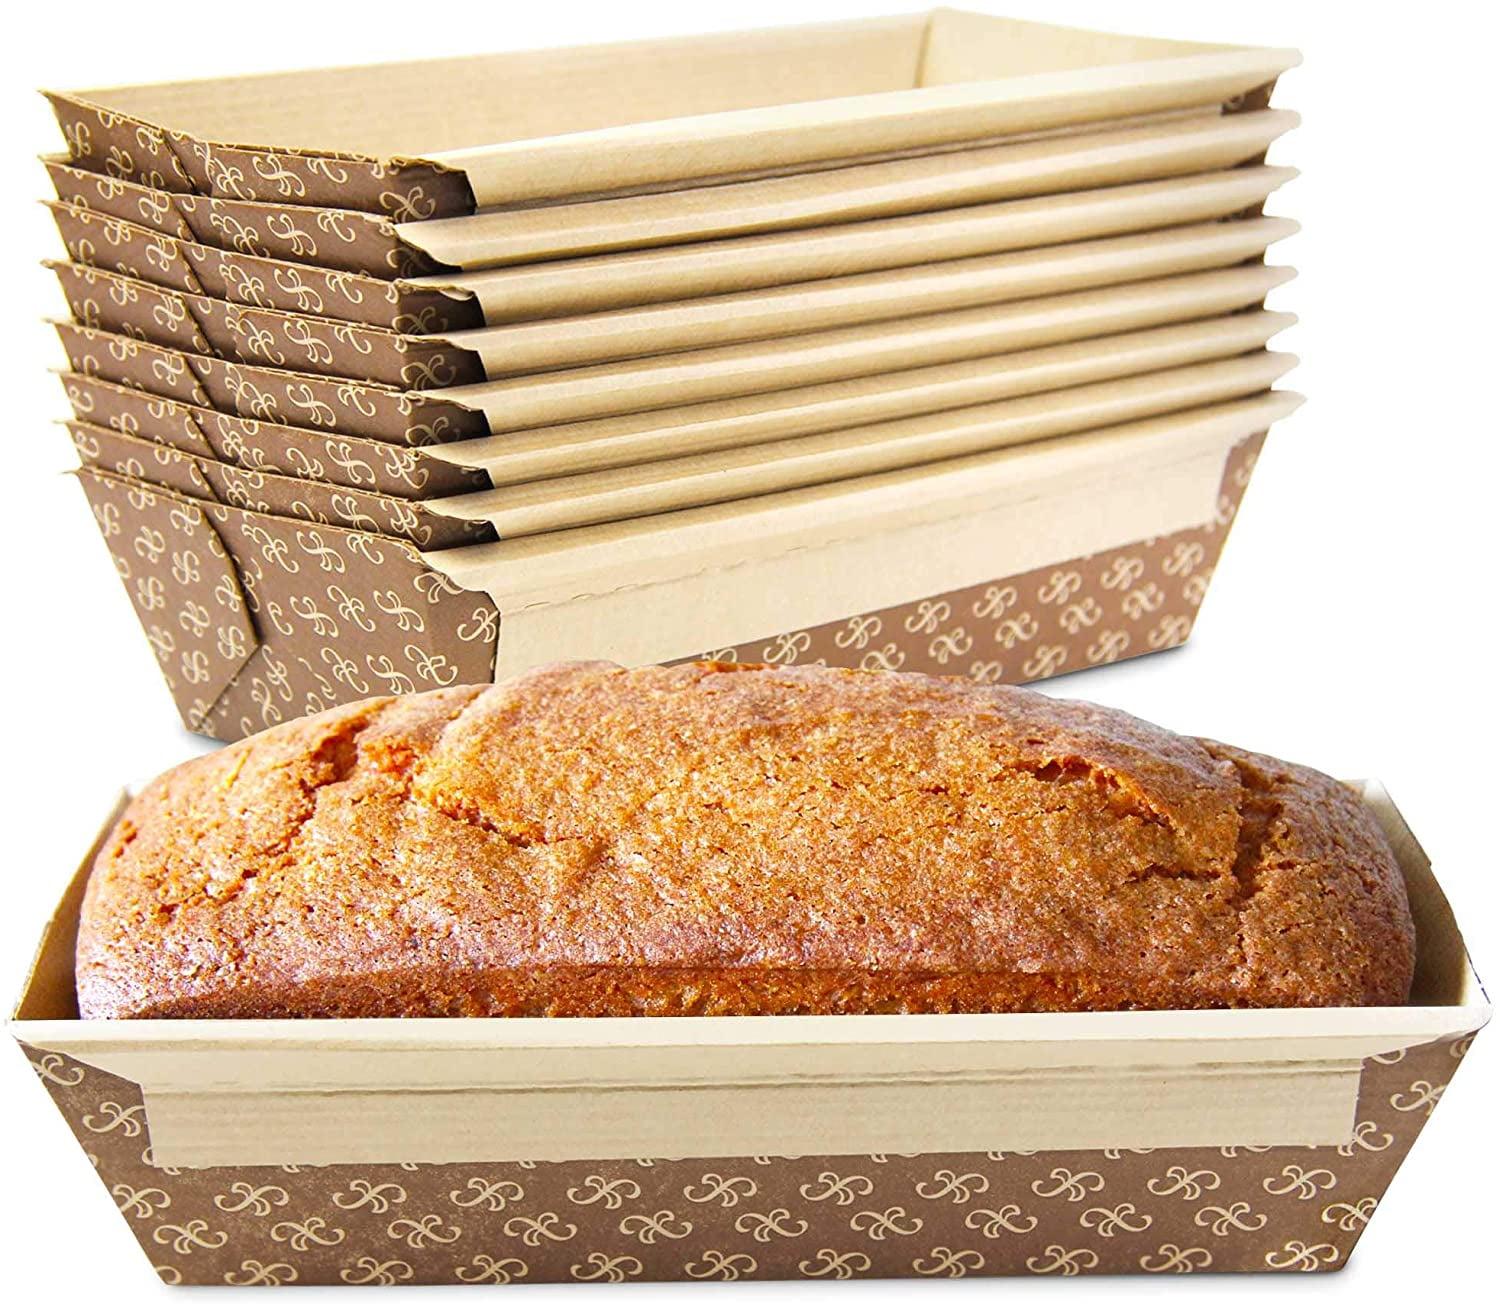 1 lb Seamless Loaf Pan - The Peppermill